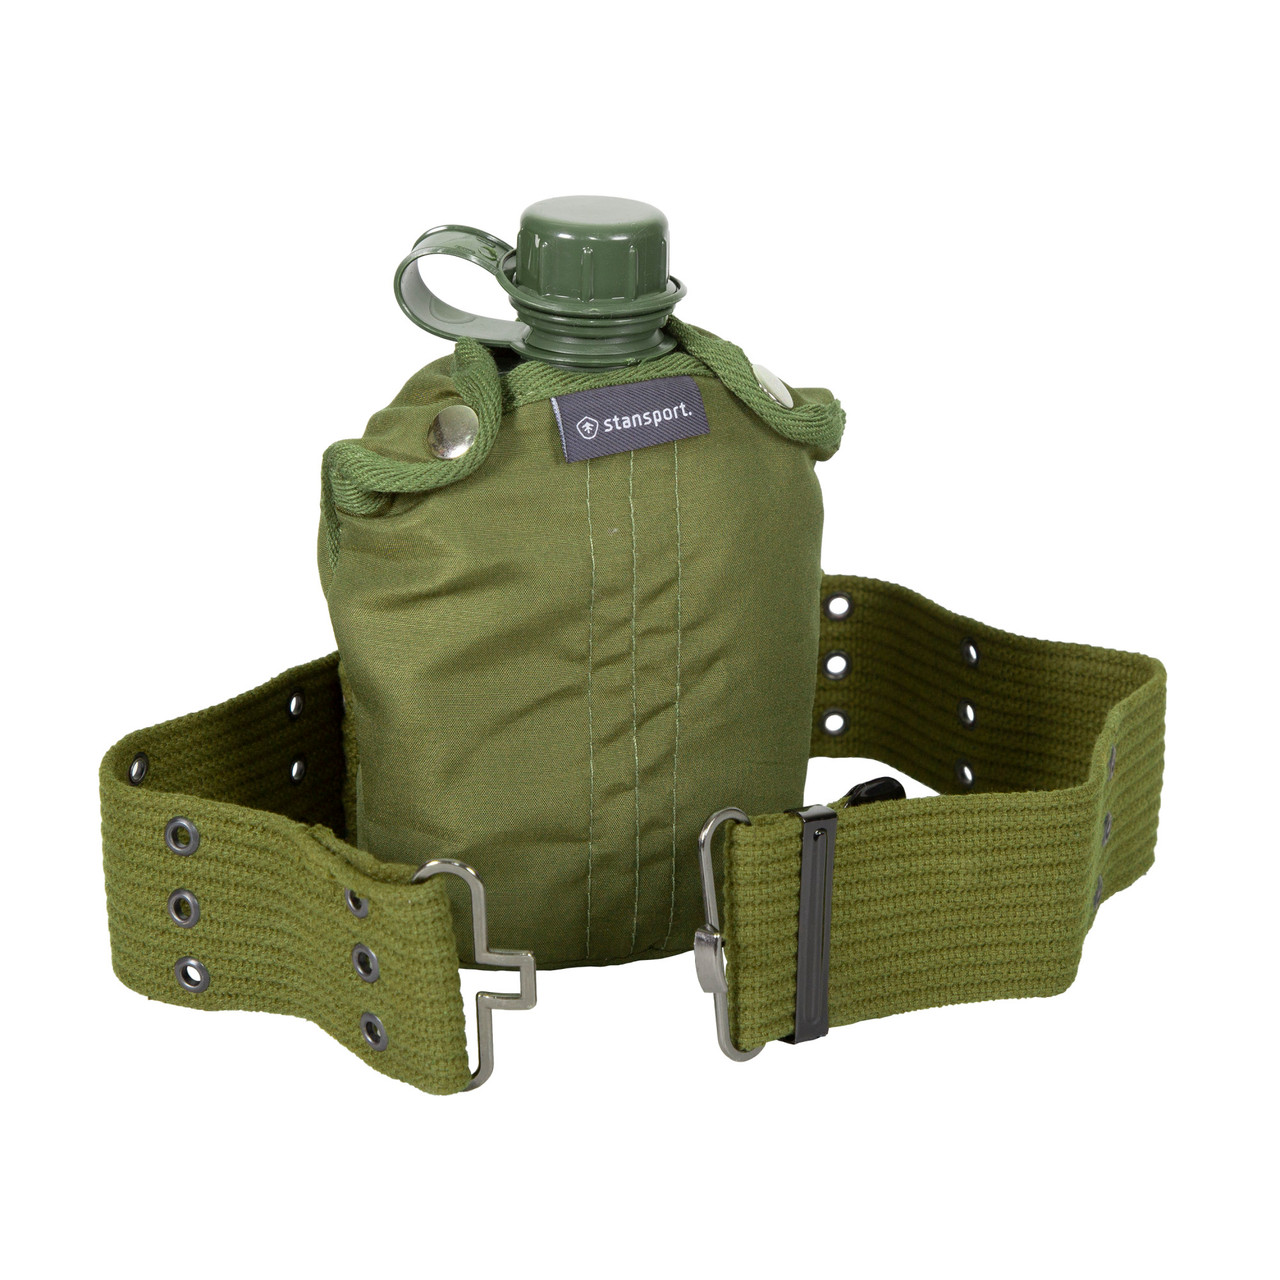 G.I. Style Canteen, Cover & Belt - Stansport